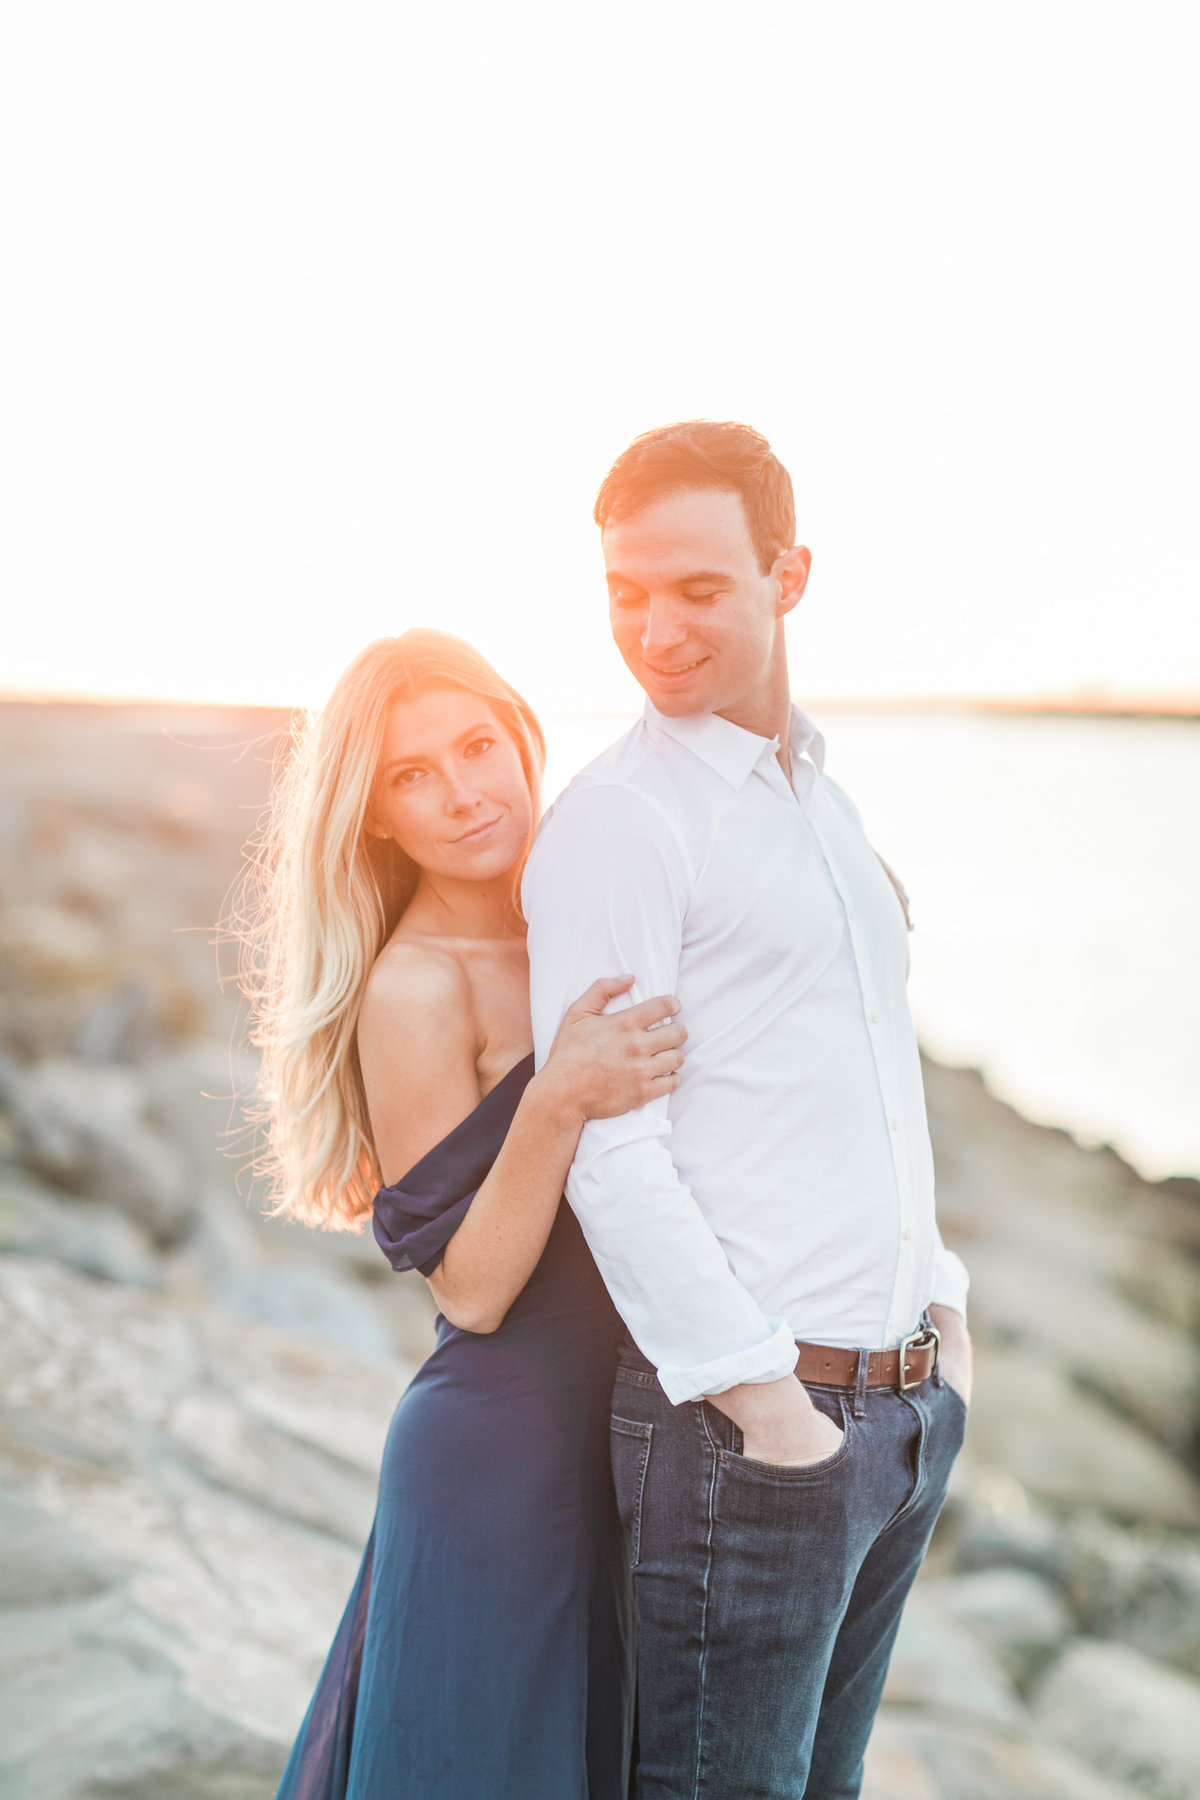 Venice Canal Beach Engagement Session_Valorie Darling Photography-7033